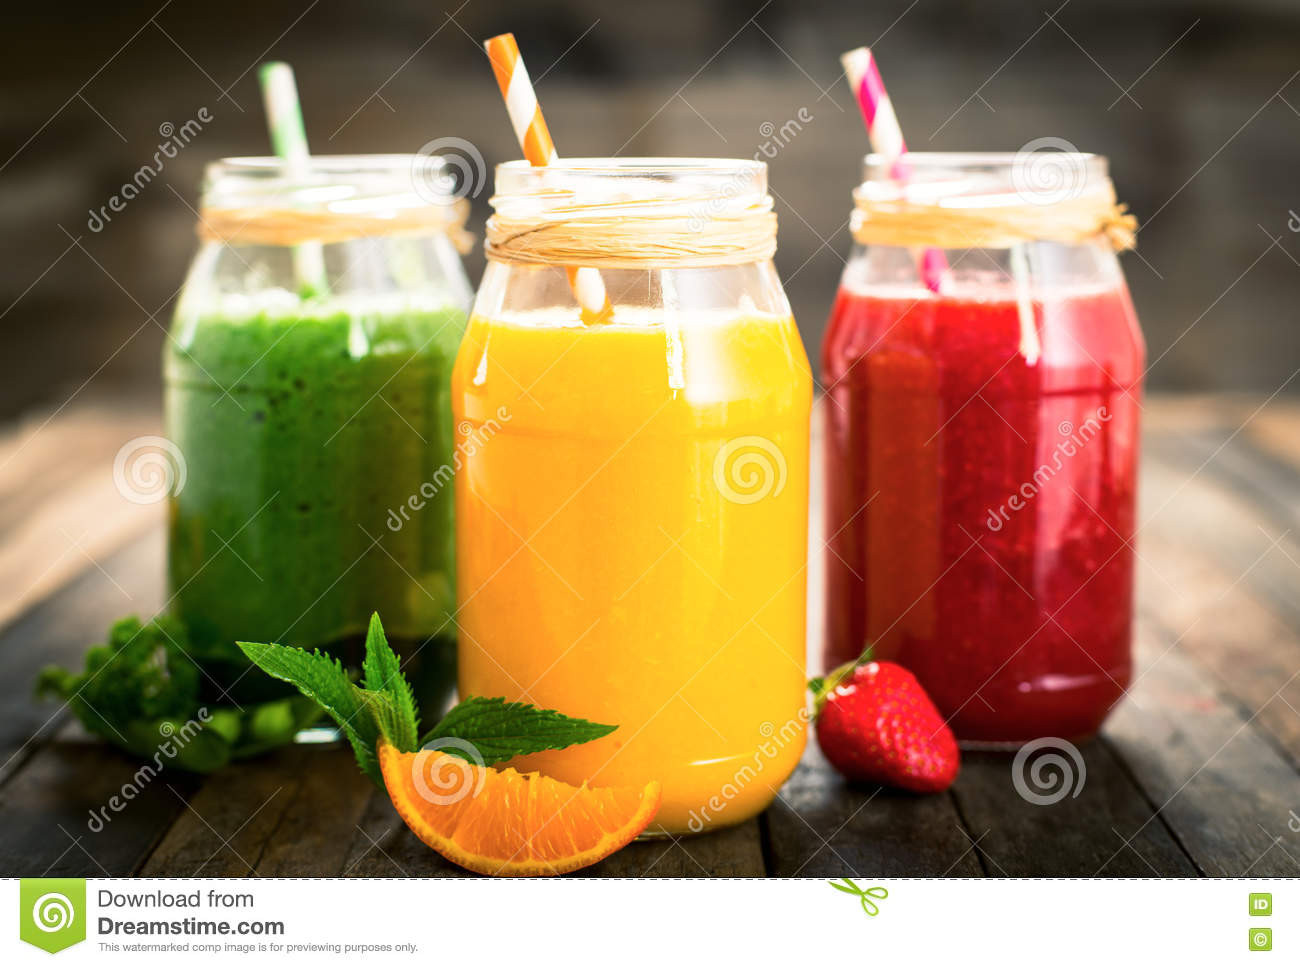 Healthy Vegetable Smoothies
 Healthy Fruit And Ve able Smoothies Stock Image